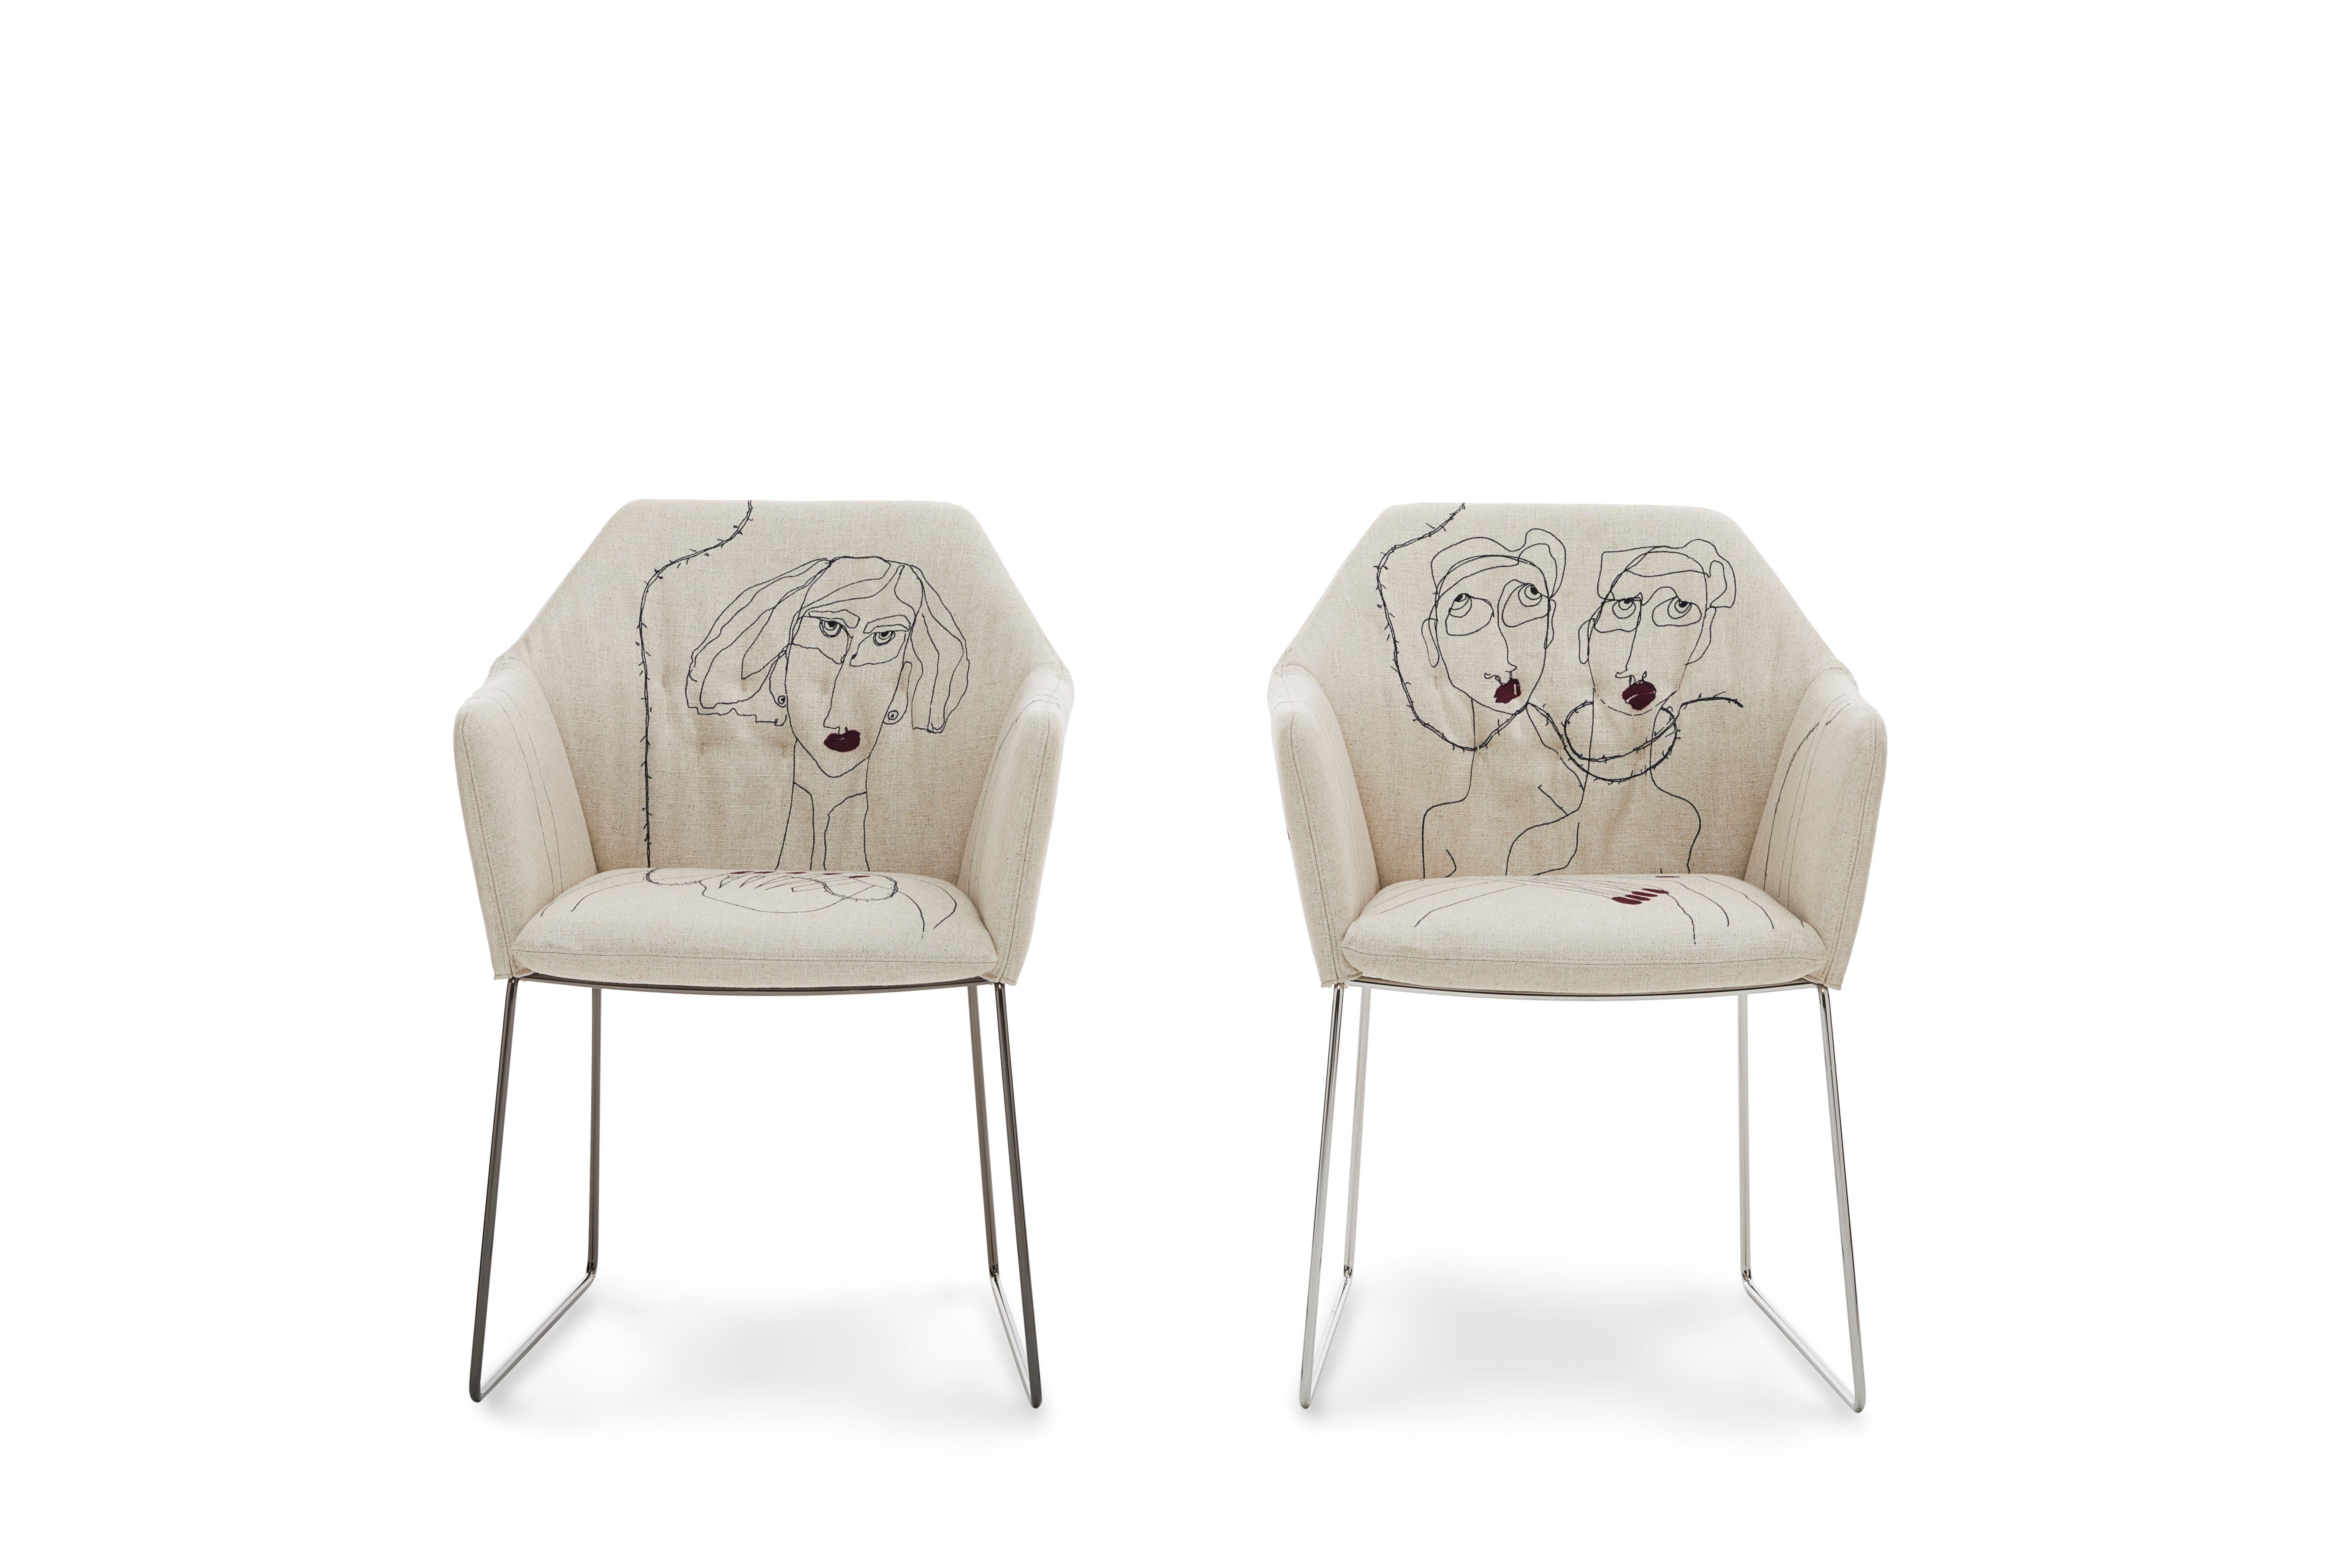 Italian New York Chair 1 by Marras in Beige Upholstery & Chrome Legs by Sergio Bicego For Sale